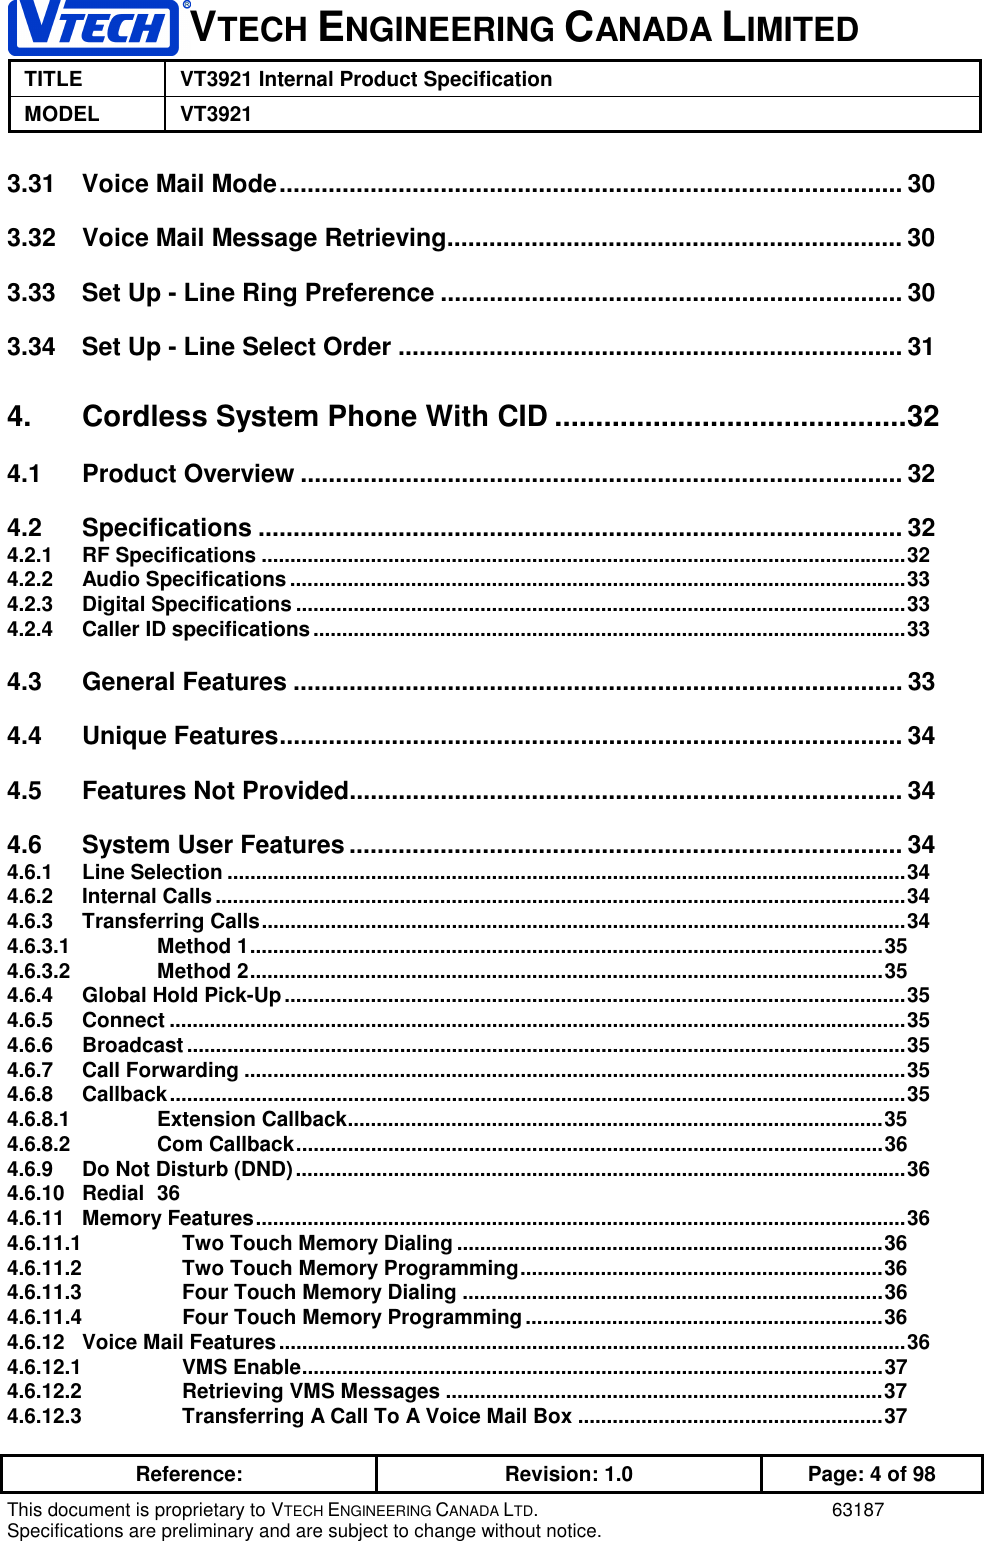 VTECH ENGINEERING CANADA LIMITEDTITLE VT3921 Internal Product SpecificationMODEL VT3921Reference: Revision: 1.0 Page: 4 of 98This document is proprietary to VTECH ENGINEERING CANADA LTD. 63187Specifications are preliminary and are subject to change without notice.3.31 Voice Mail Mode......................................................................................... 303.32 Voice Mail Message Retrieving................................................................. 303.33 Set Up - Line Ring Preference .................................................................. 303.34 Set Up - Line Select Order ........................................................................ 314. Cordless System Phone With CID ...........................................324.1 Product Overview ...................................................................................... 324.2 Specifications ............................................................................................ 324.2.1 RF Specifications ................................................................................................................324.2.2 Audio Specifications ...........................................................................................................334.2.3 Digital Specifications ..........................................................................................................334.2.4 Caller ID specifications.......................................................................................................334.3 General Features ....................................................................................... 334.4 Unique Features......................................................................................... 344.5 Features Not Provided............................................................................... 344.6 System User Features ............................................................................... 344.6.1 Line Selection ......................................................................................................................344.6.2 Internal Calls........................................................................................................................344.6.3 Transferring Calls................................................................................................................344.6.3.1 Method 1..............................................................................................................354.6.3.2 Method 2..............................................................................................................354.6.4 Global Hold Pick-Up............................................................................................................354.6.5 Connect ................................................................................................................................354.6.6 Broadcast .............................................................................................................................354.6.7 Call Forwarding ...................................................................................................................354.6.8 Callback................................................................................................................................354.6.8.1 Extension Callback.............................................................................................354.6.8.2 Com Callback......................................................................................................364.6.9 Do Not Disturb (DND)..........................................................................................................364.6.10 Redial 364.6.11 Memory Features.................................................................................................................364.6.11.1 Two Touch Memory Dialing ..........................................................................364.6.11.2 Two Touch Memory Programming...............................................................364.6.11.3 Four Touch Memory Dialing .........................................................................364.6.11.4 Four Touch Memory Programming..............................................................364.6.12 Voice Mail Features.............................................................................................................364.6.12.1 VMS Enable.....................................................................................................374.6.12.2 Retrieving VMS Messages ............................................................................374.6.12.3 Transferring A Call To A Voice Mail Box .....................................................37